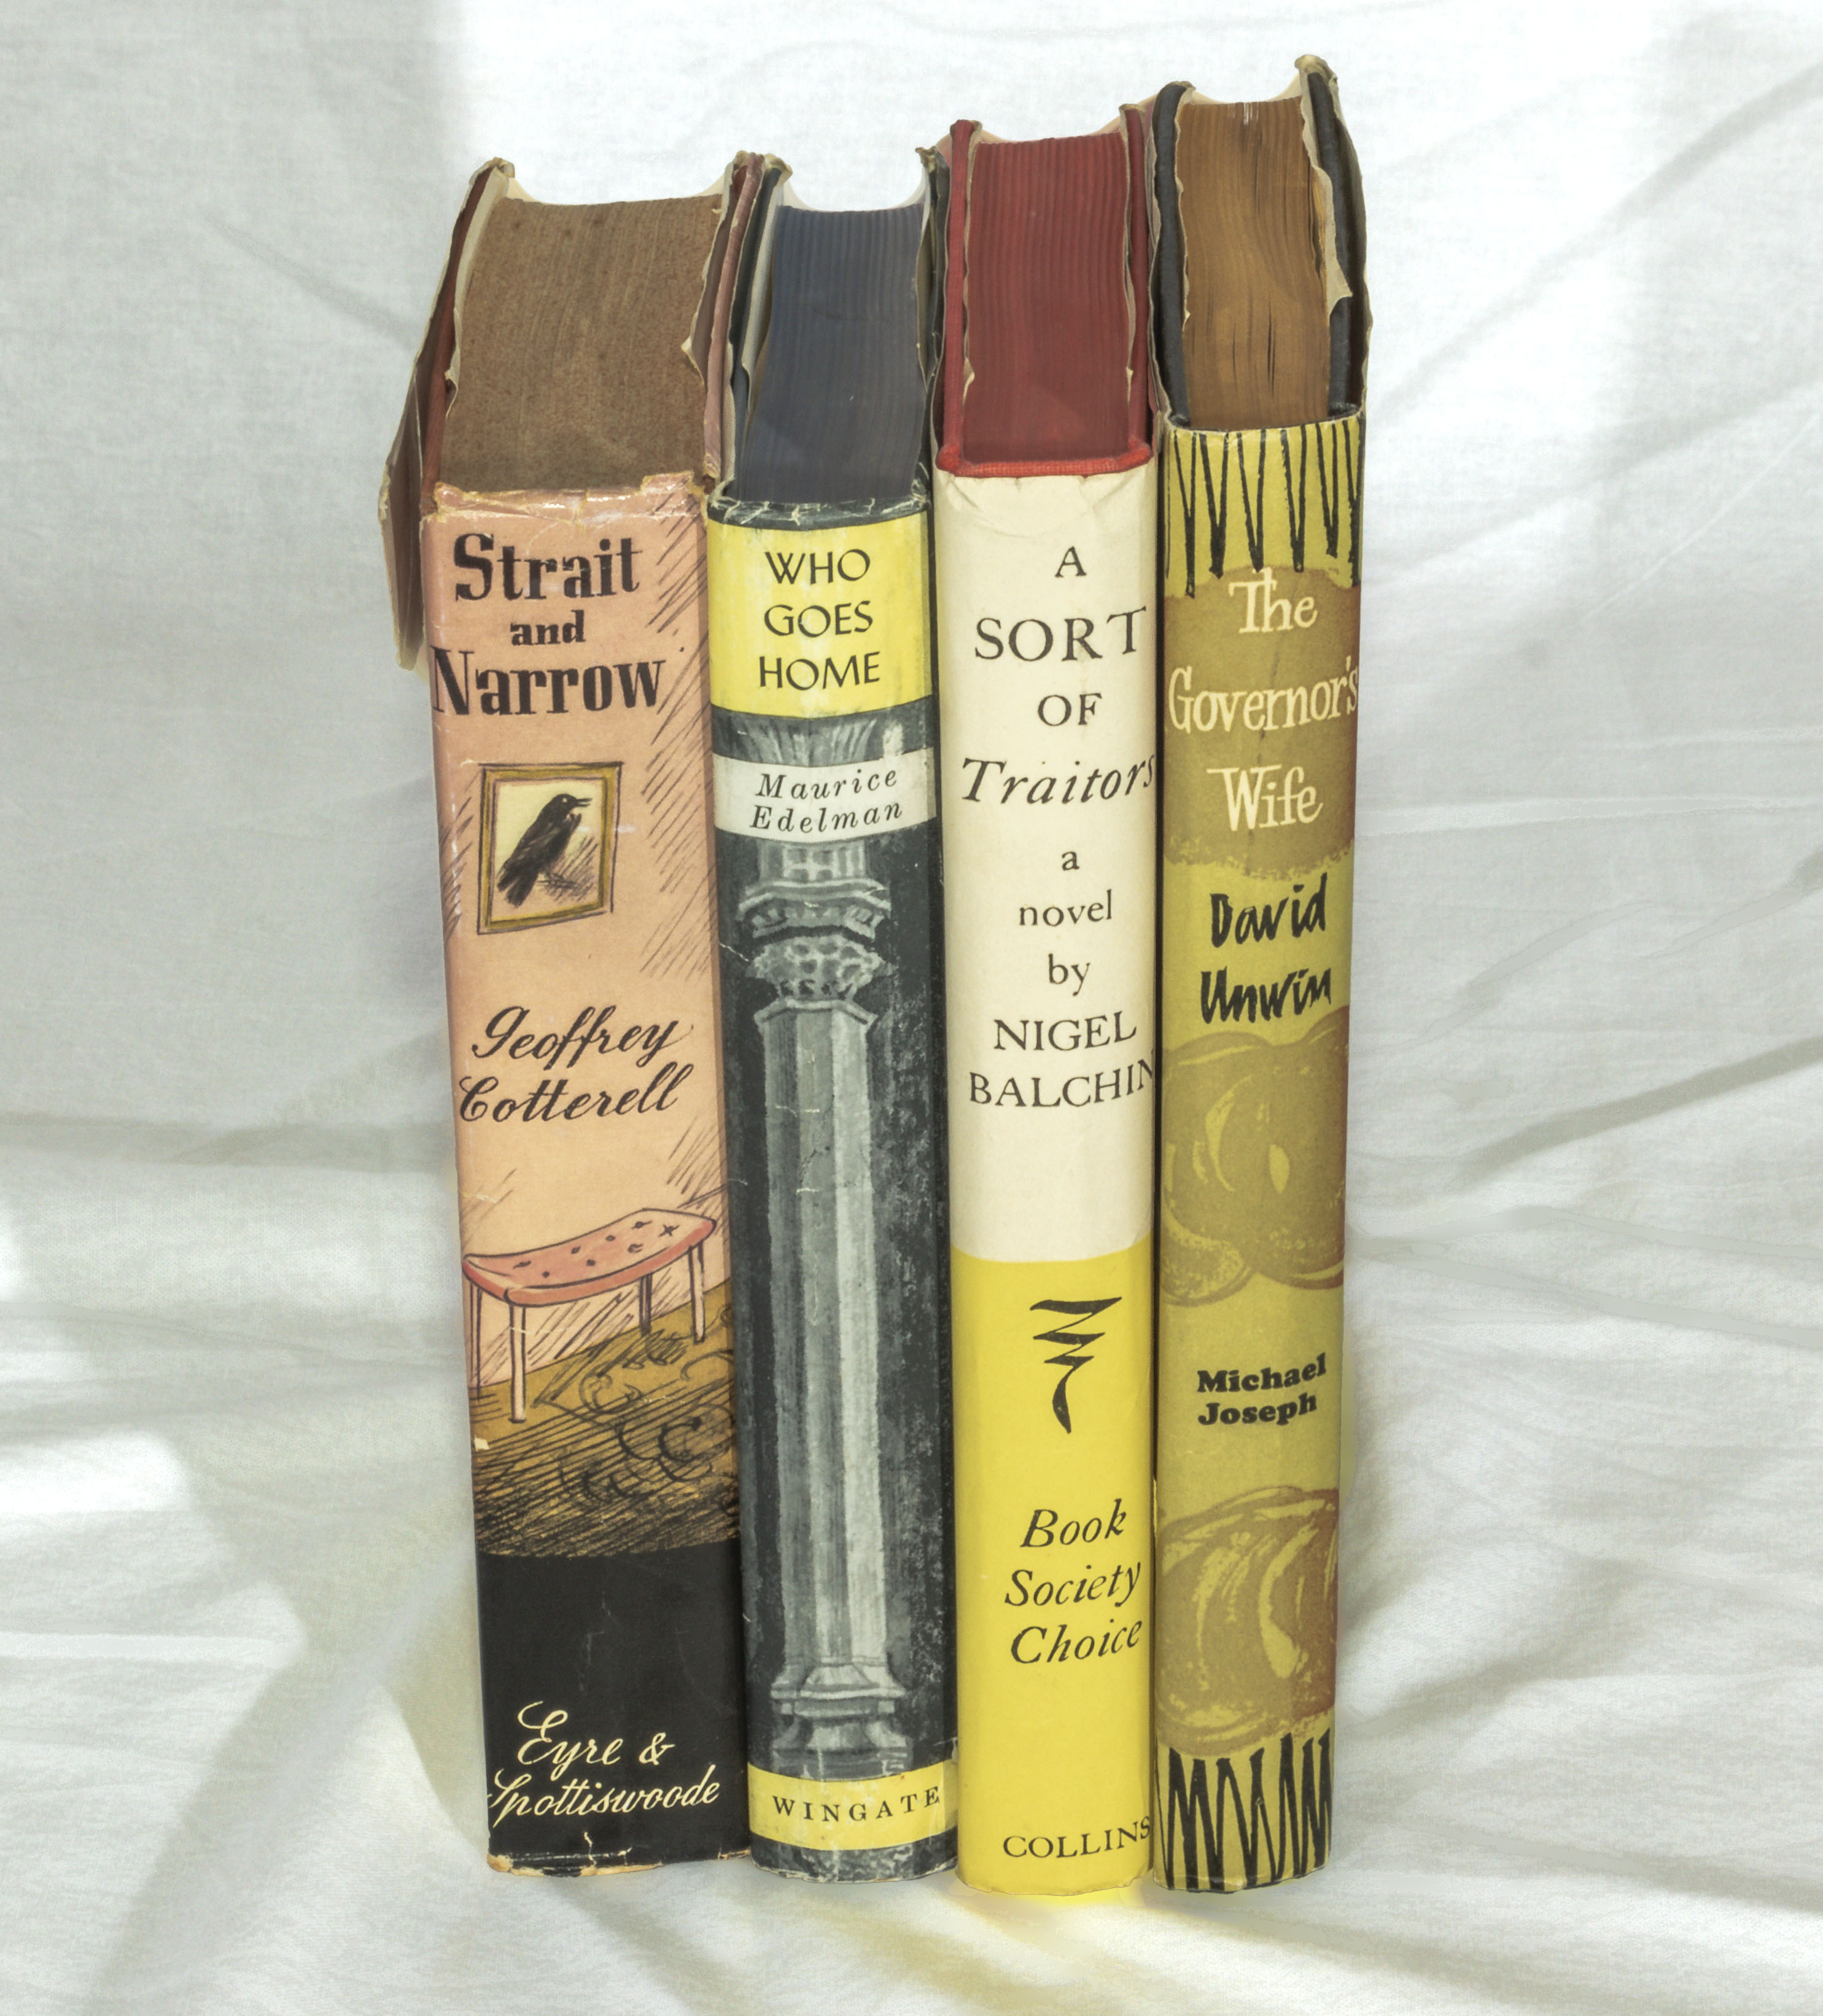 Four first edition, signed hard backed books. The Governers Wife - David Unwin; A Sort of Traitors -